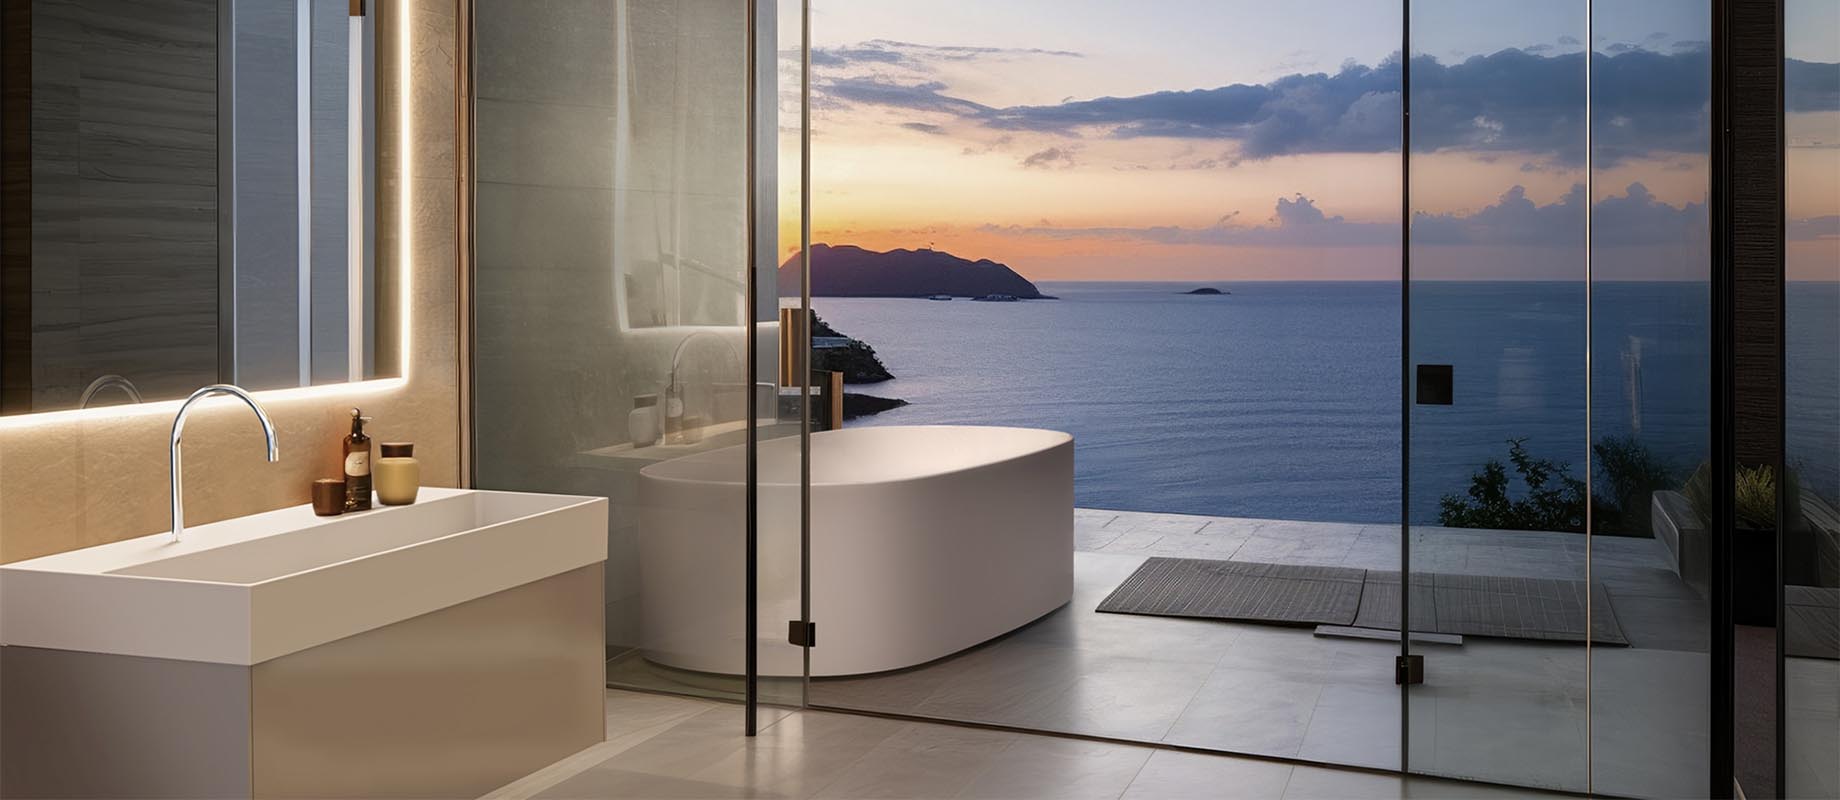 Ideal Standard | Bathroom More Solutions Bathroom | and Supplies